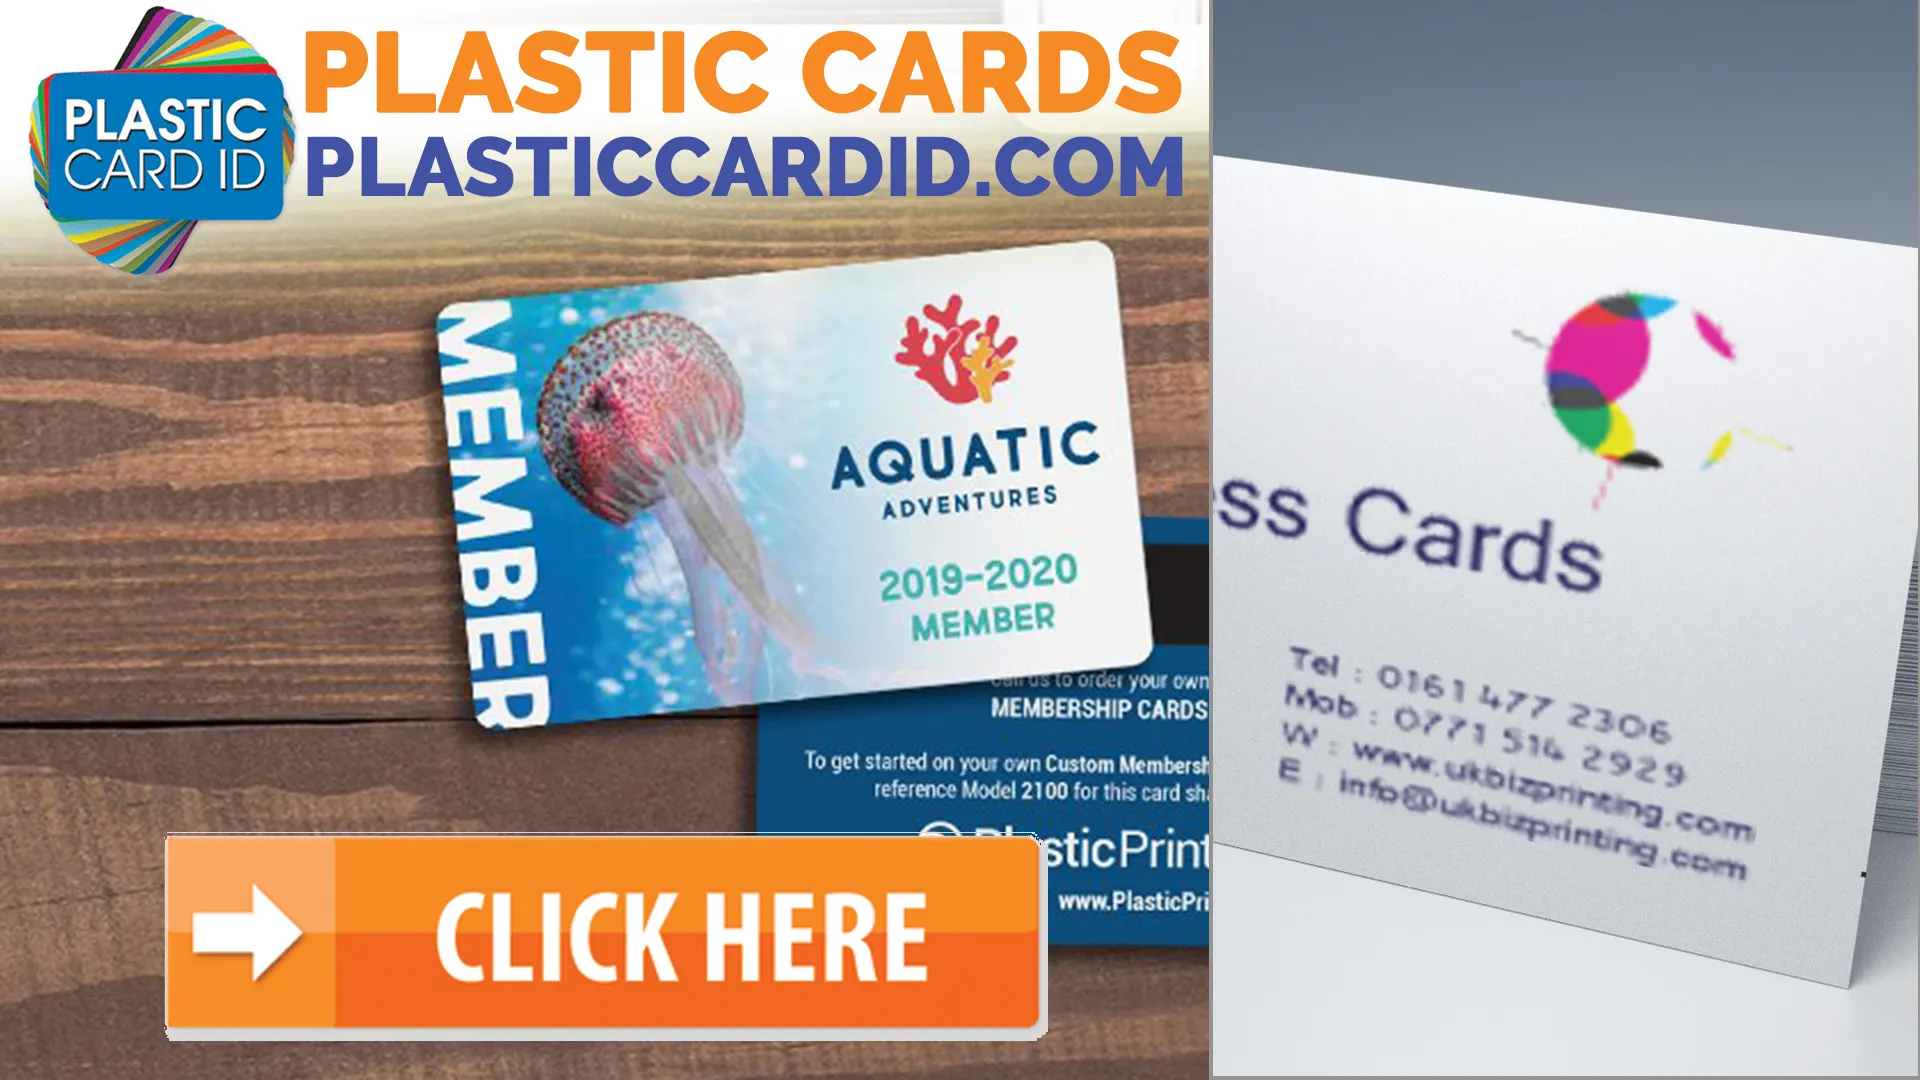 Why Choose Plastic Card ID




 for Your NFC and Mobile Payment Needs